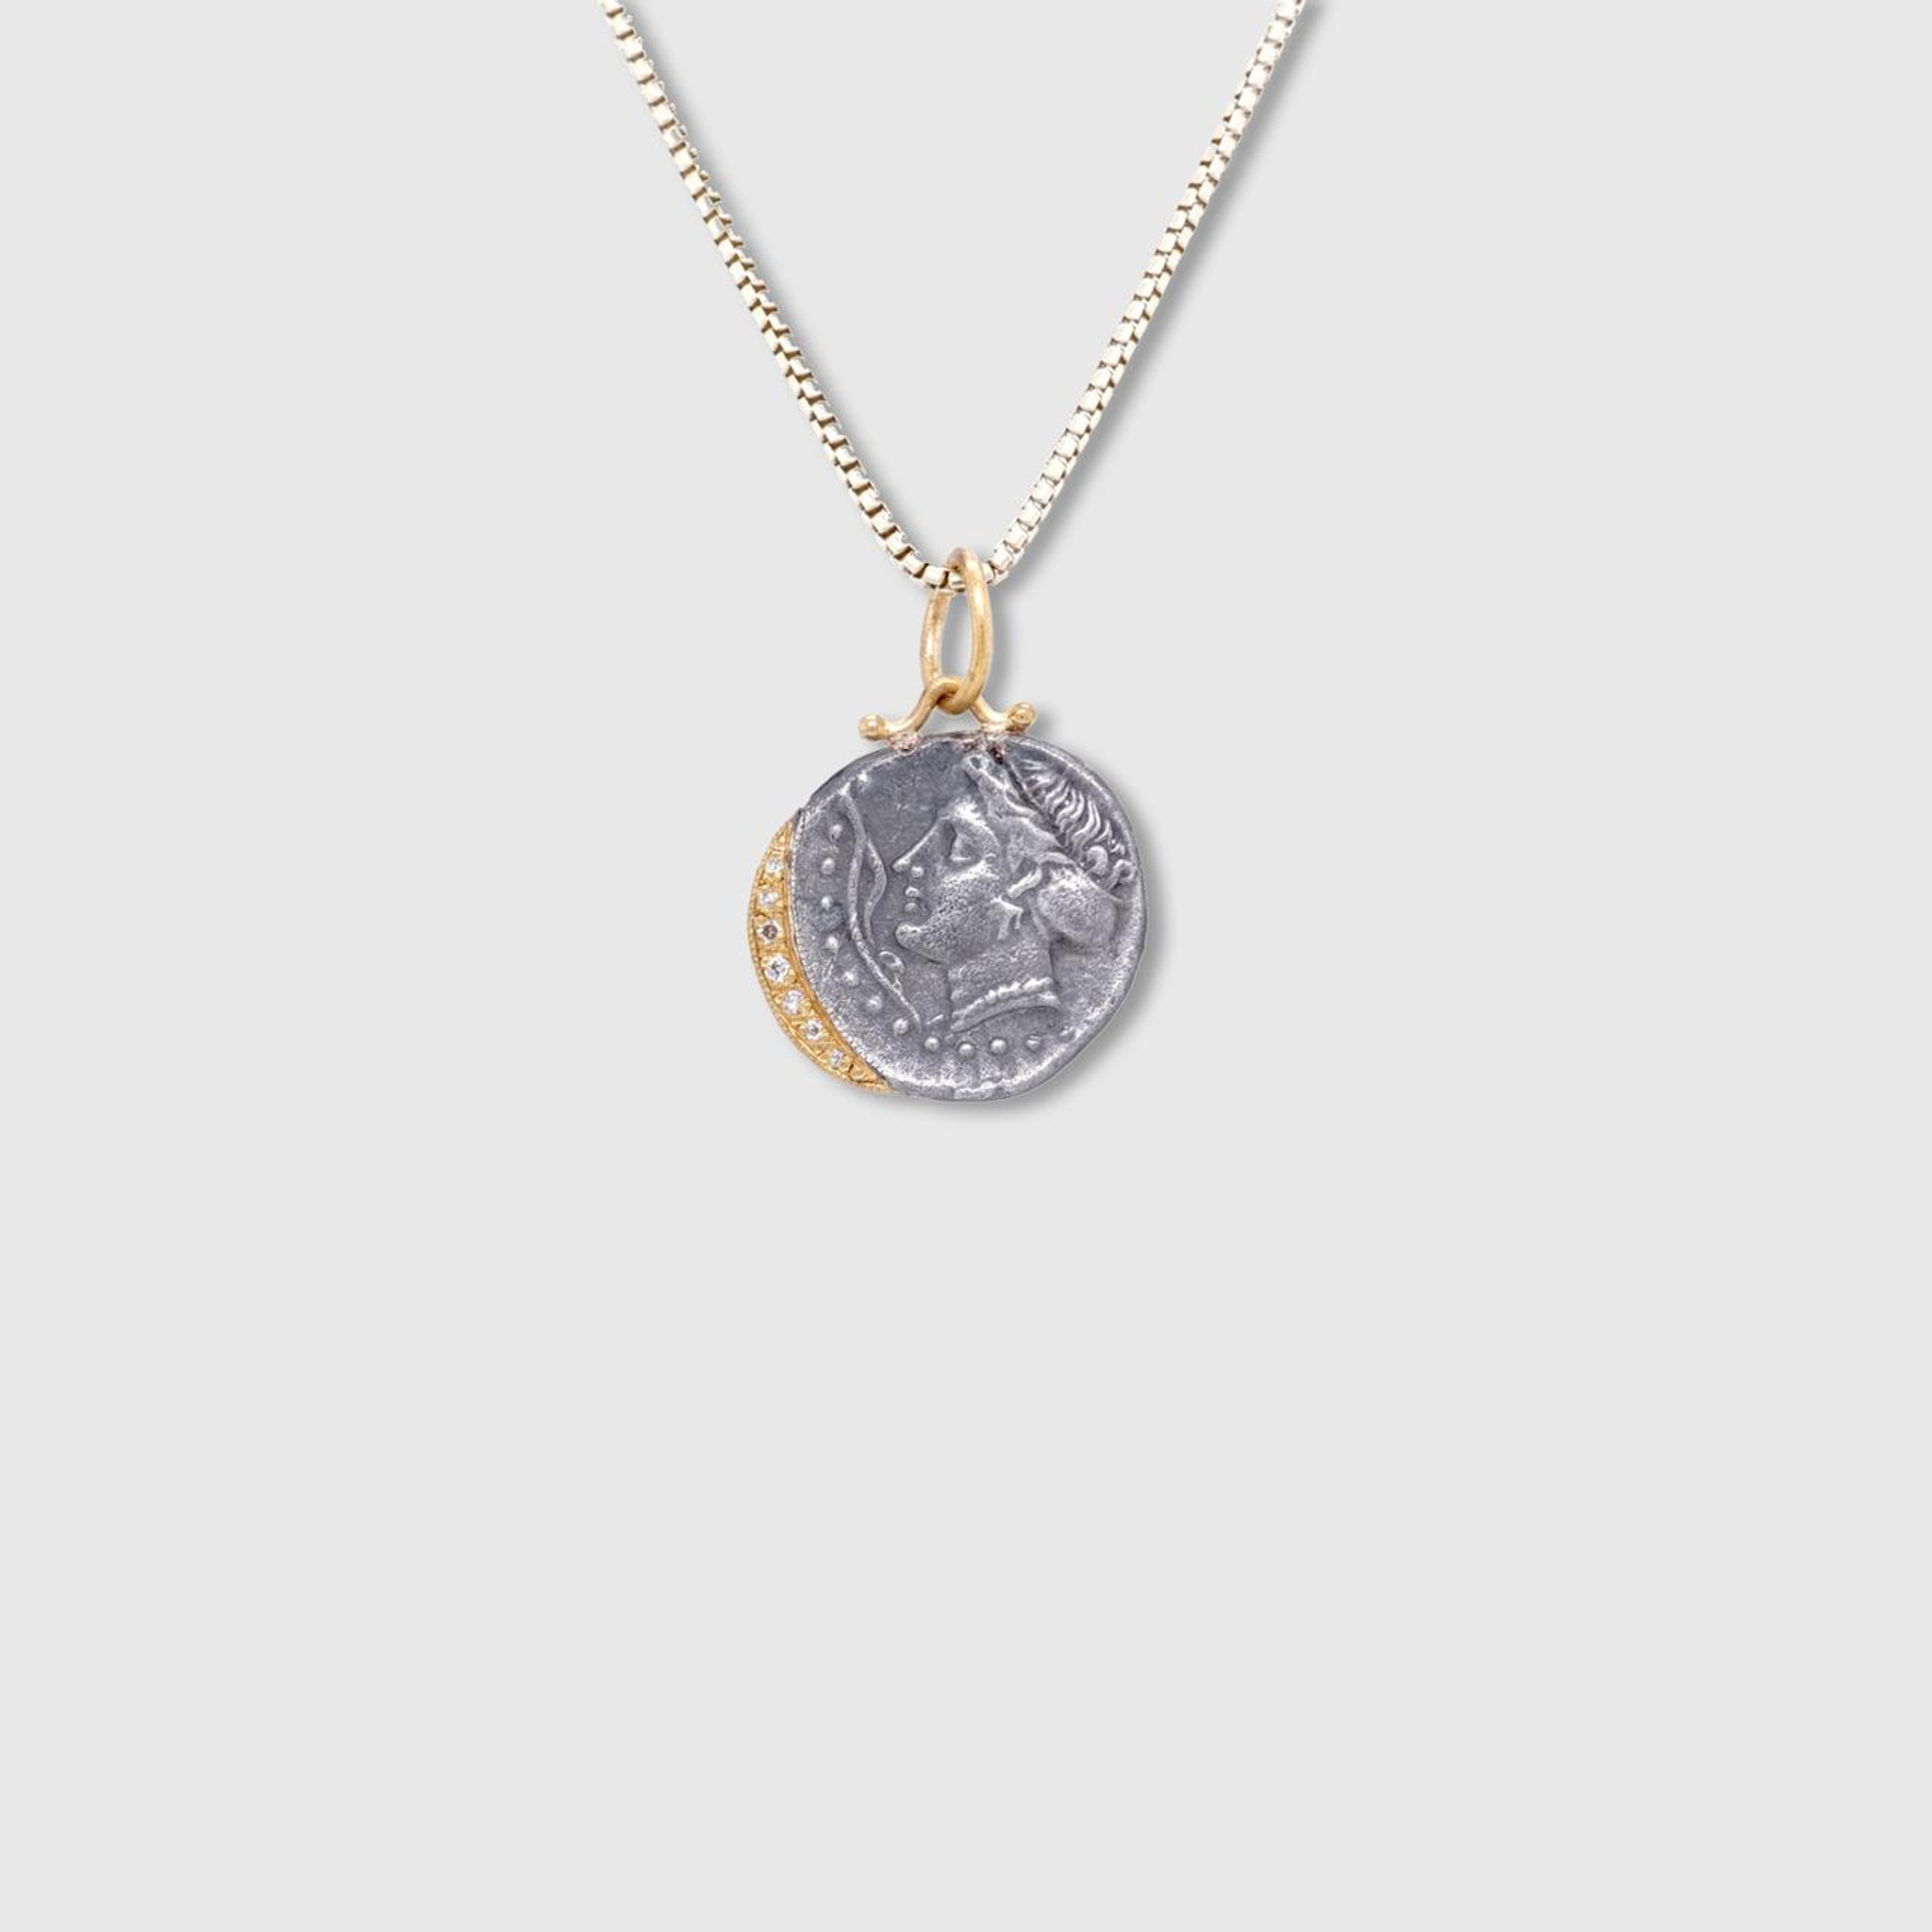 Prehistoric Works Water Nymph, Synope, Pendant Necklace Charm Coin Amulet with Diamonds, 24kt Gold and Silver 